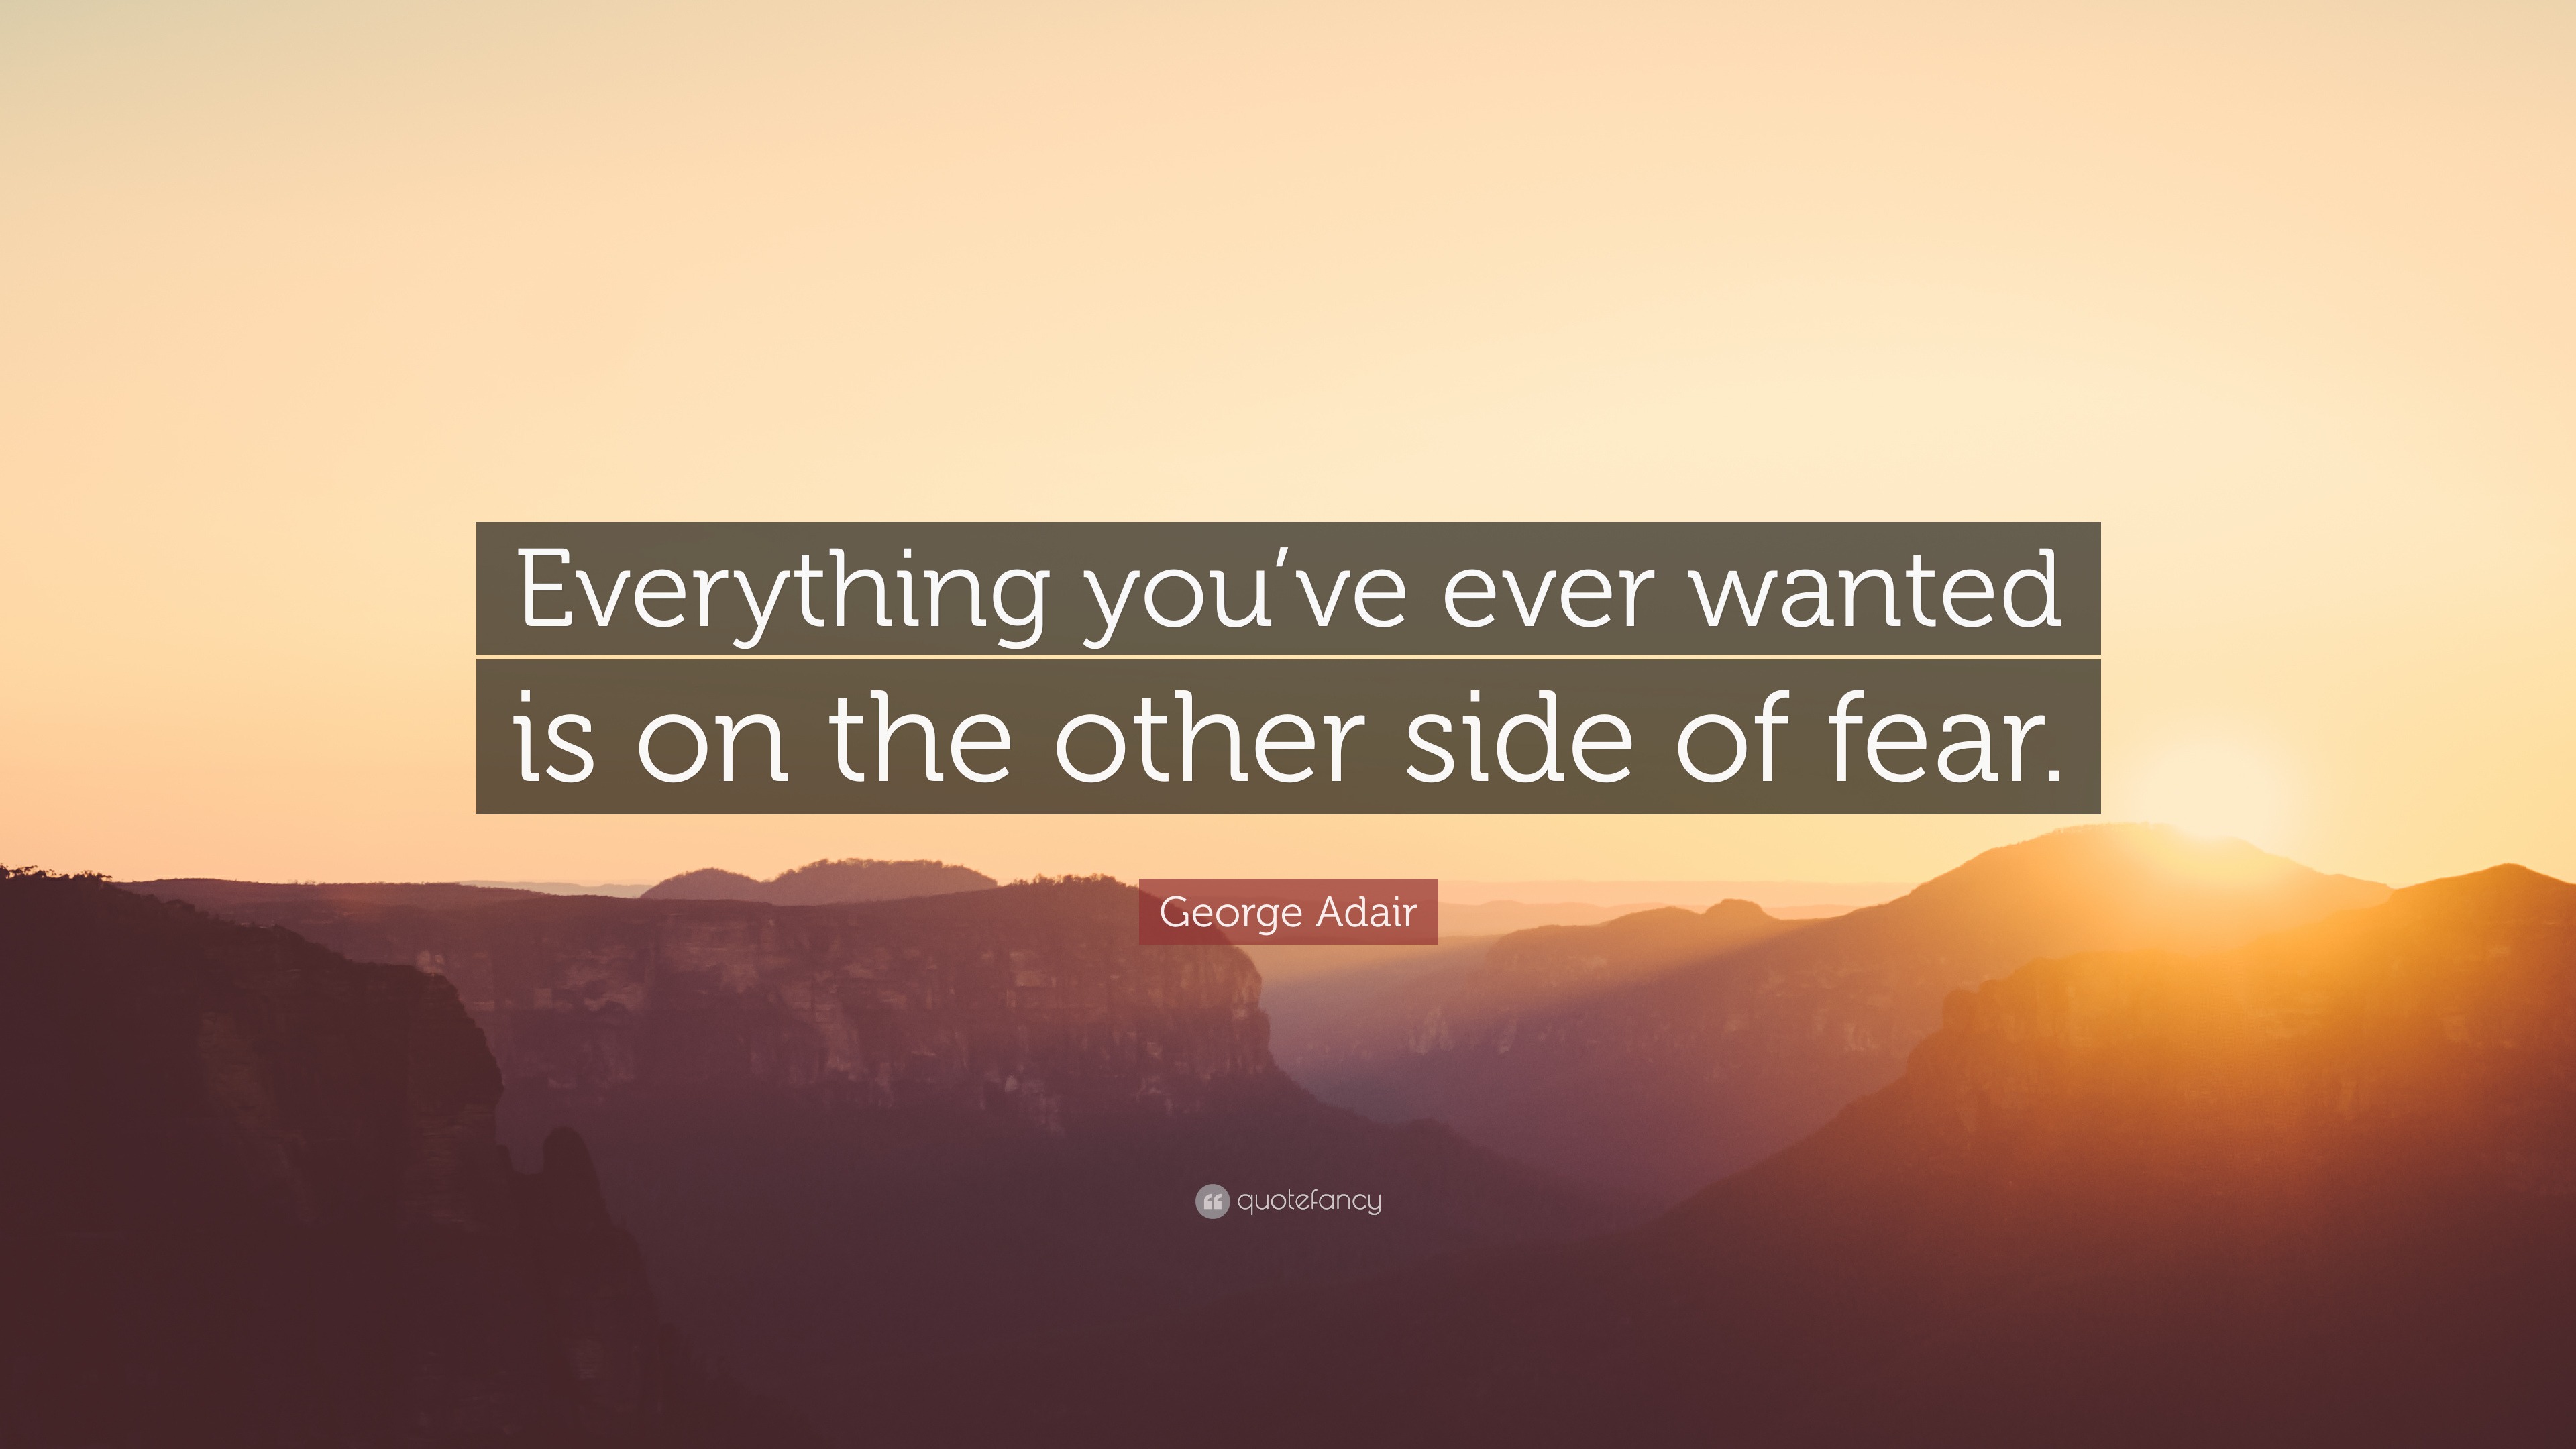 George Adair Quote “everything Youve Ever Wanted Is On The Other Side